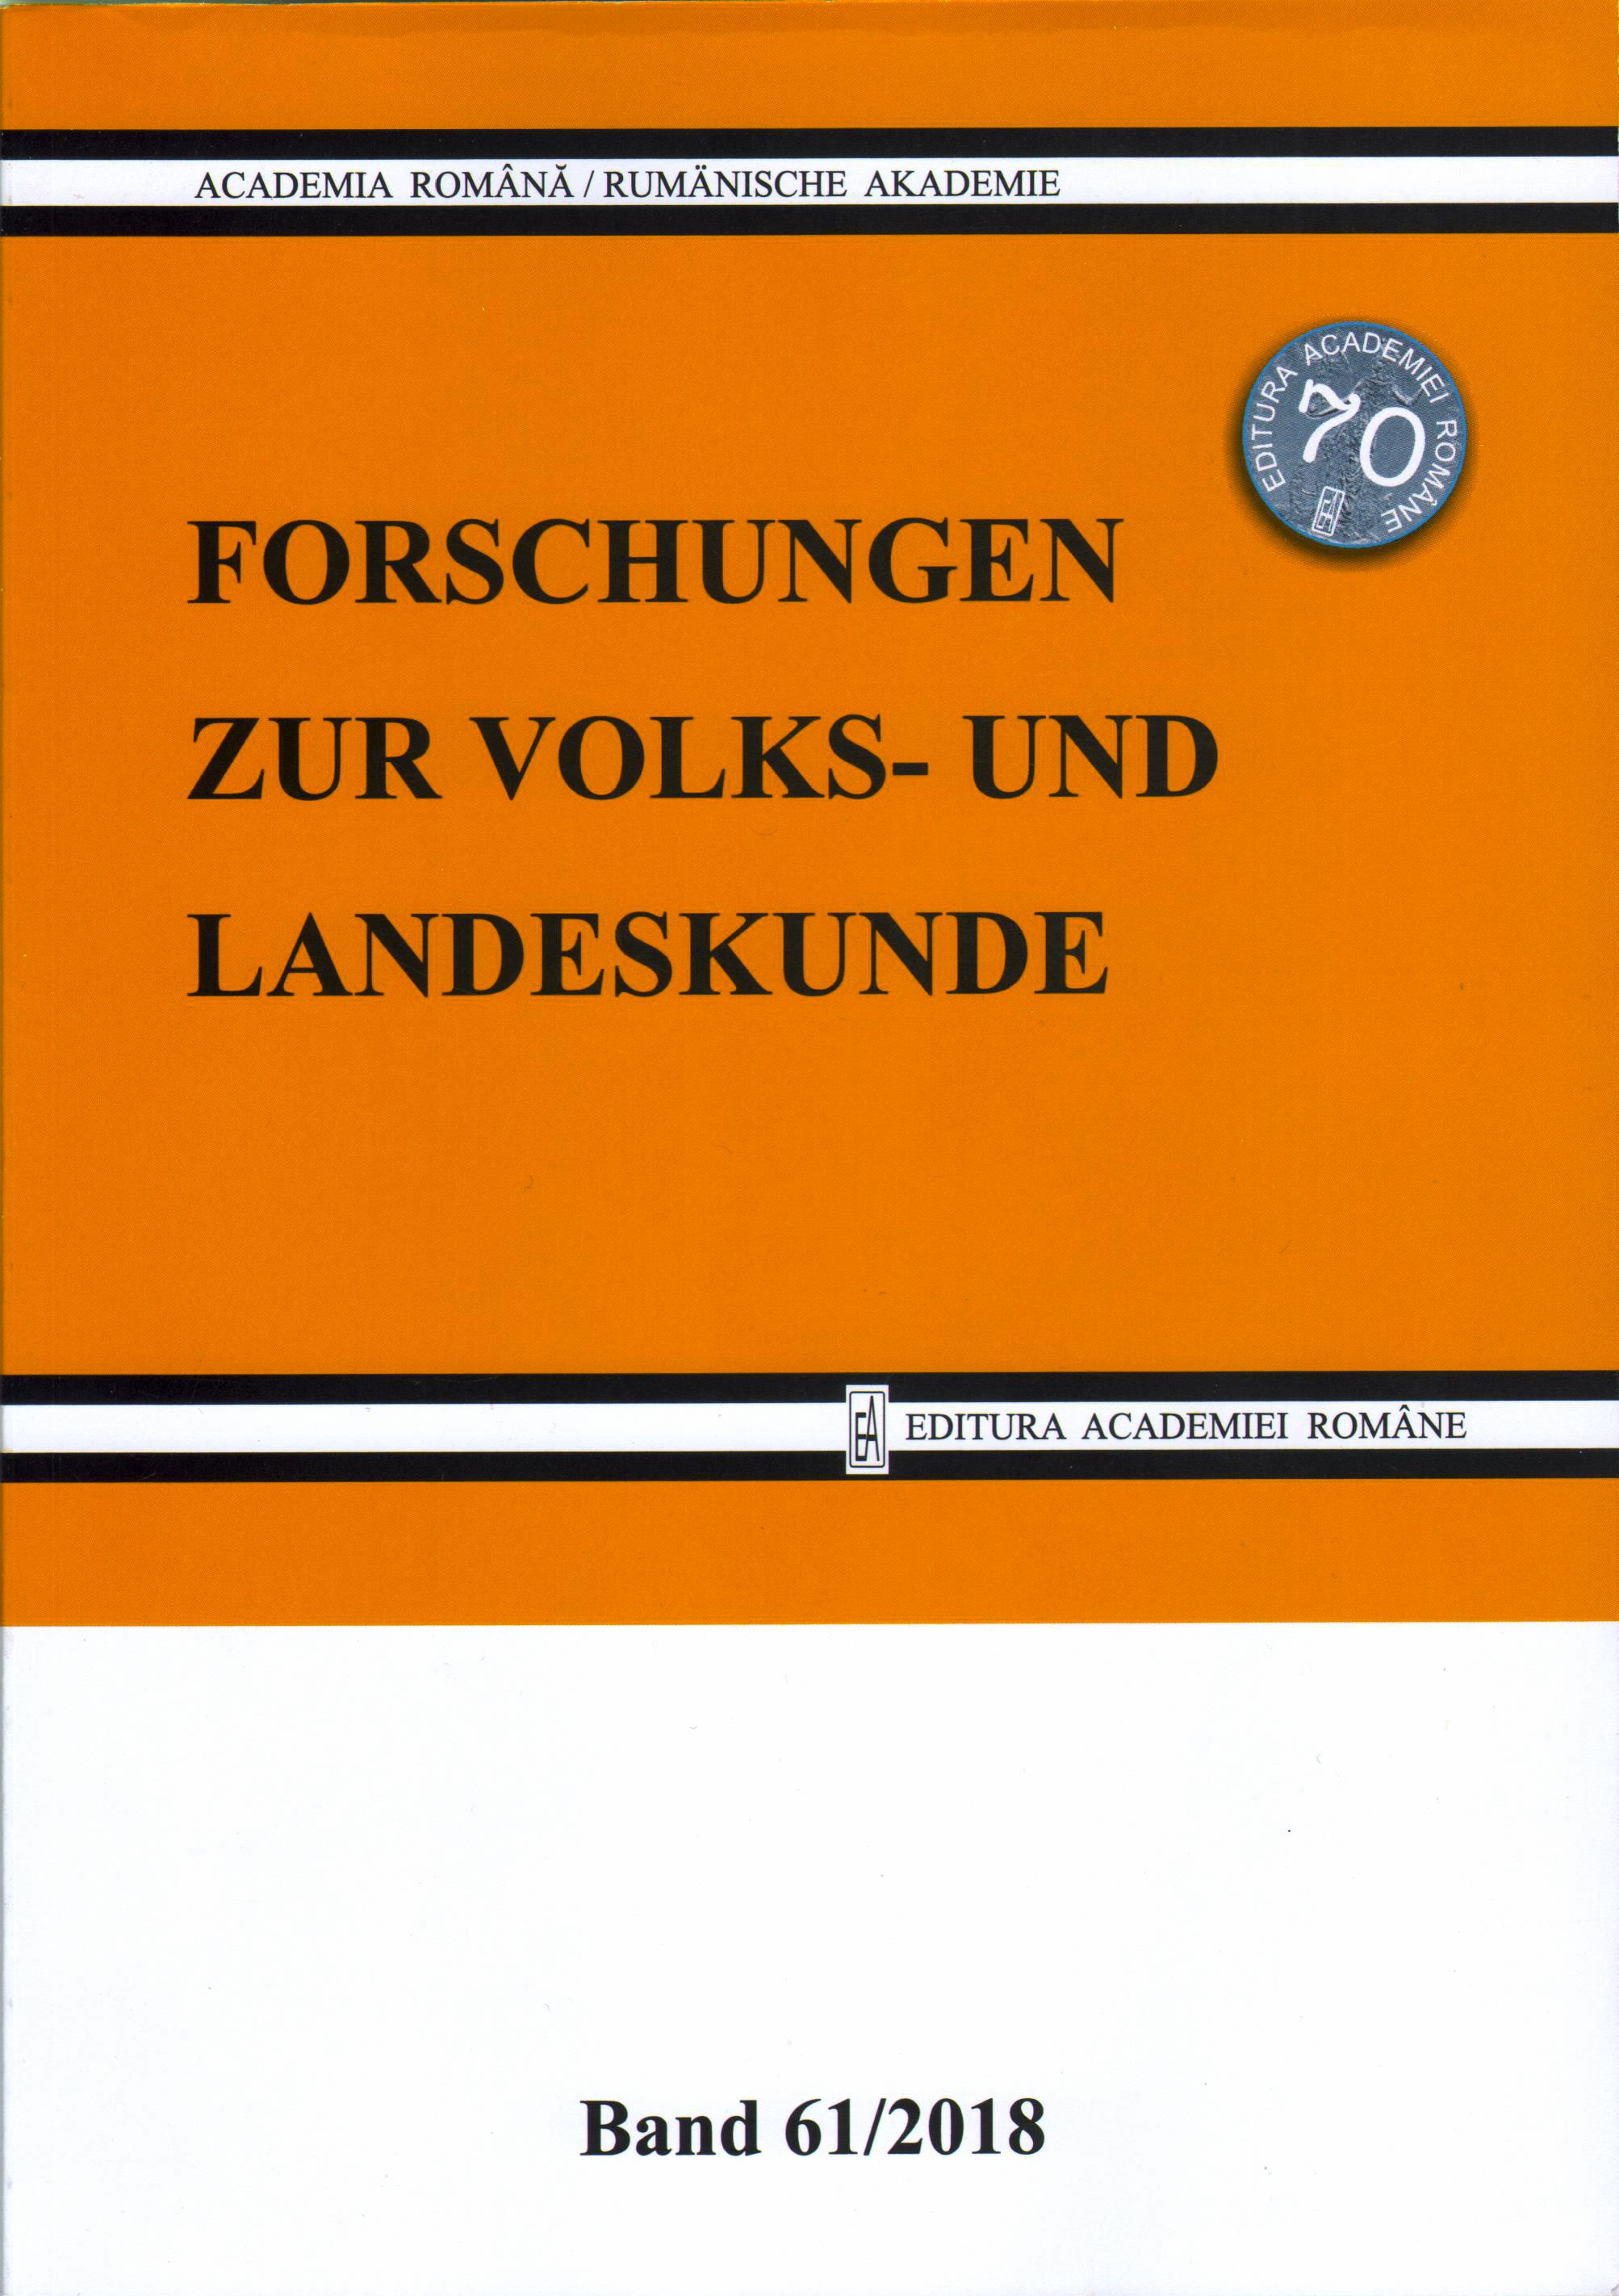 “Ägrisch” in German Saxon Documentary Sources and in the Transylvanian-Saxon Language. The Etymology of the Lexeme Based on Relevant Specialist Literature Cover Image